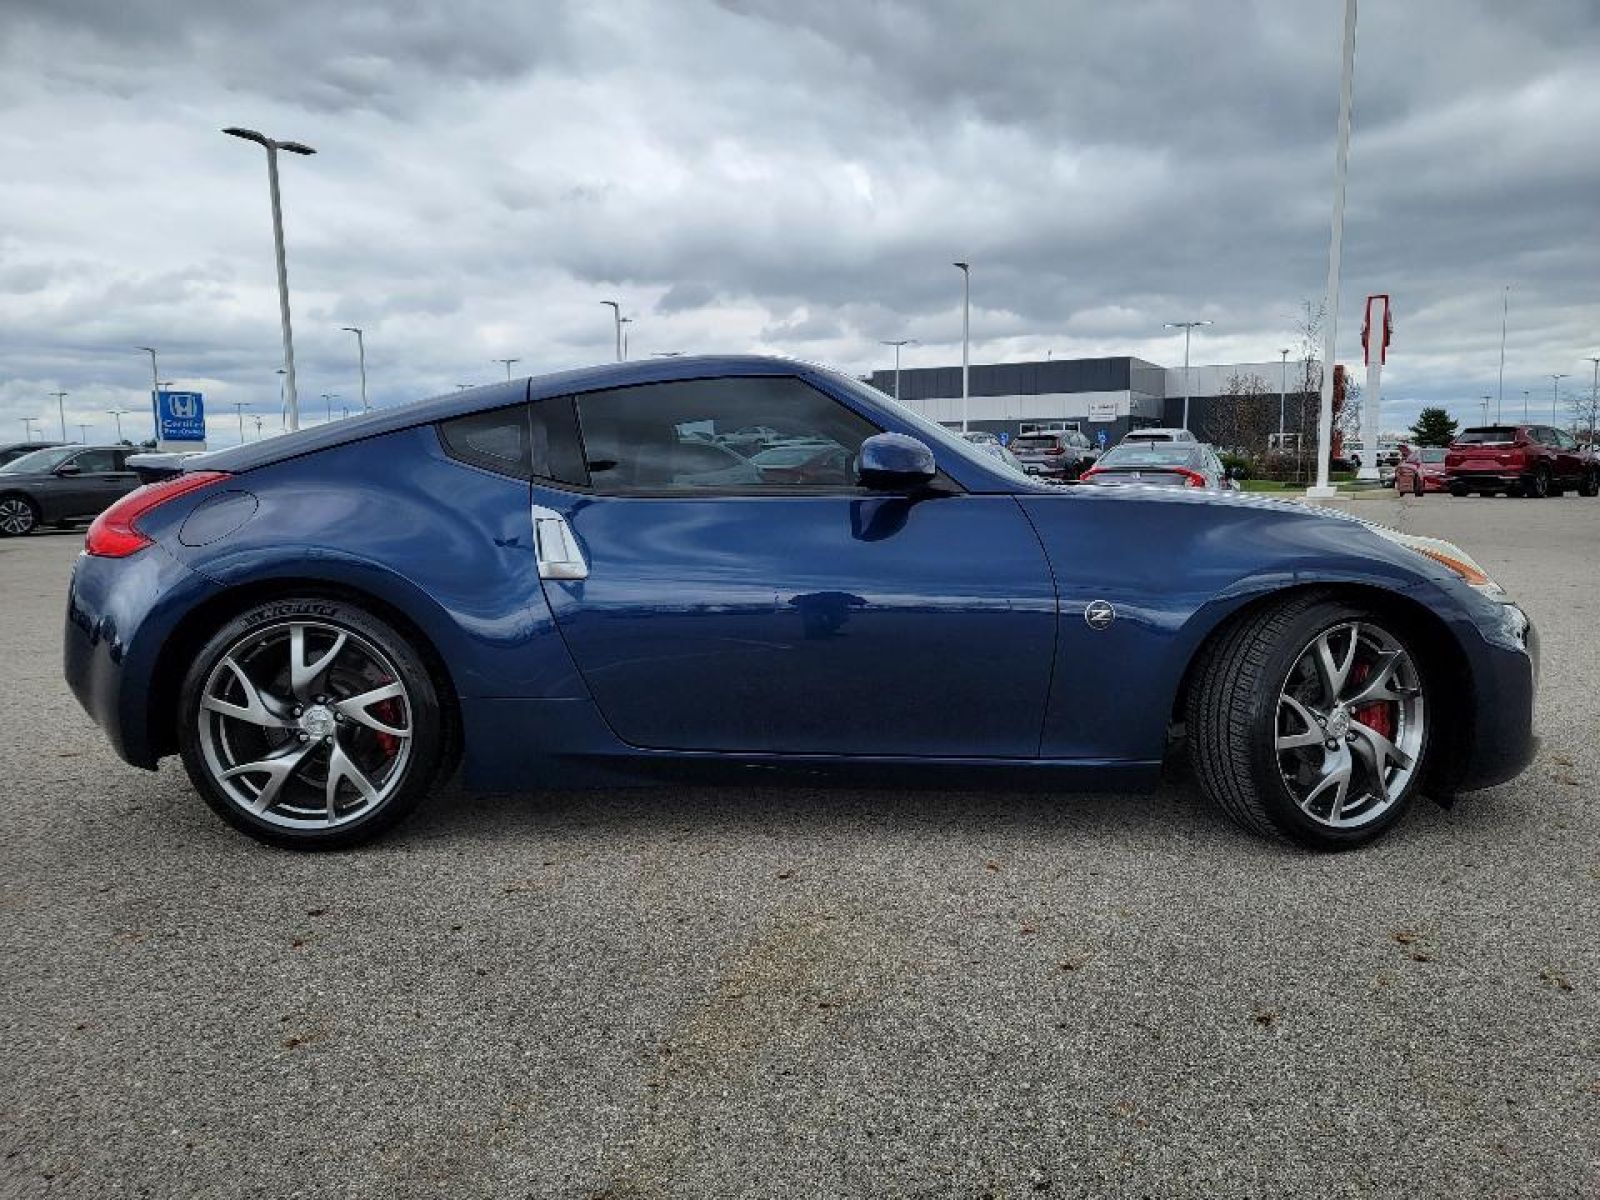 Used, 2014 Nissan 370Z Touring, Other, P0512-7